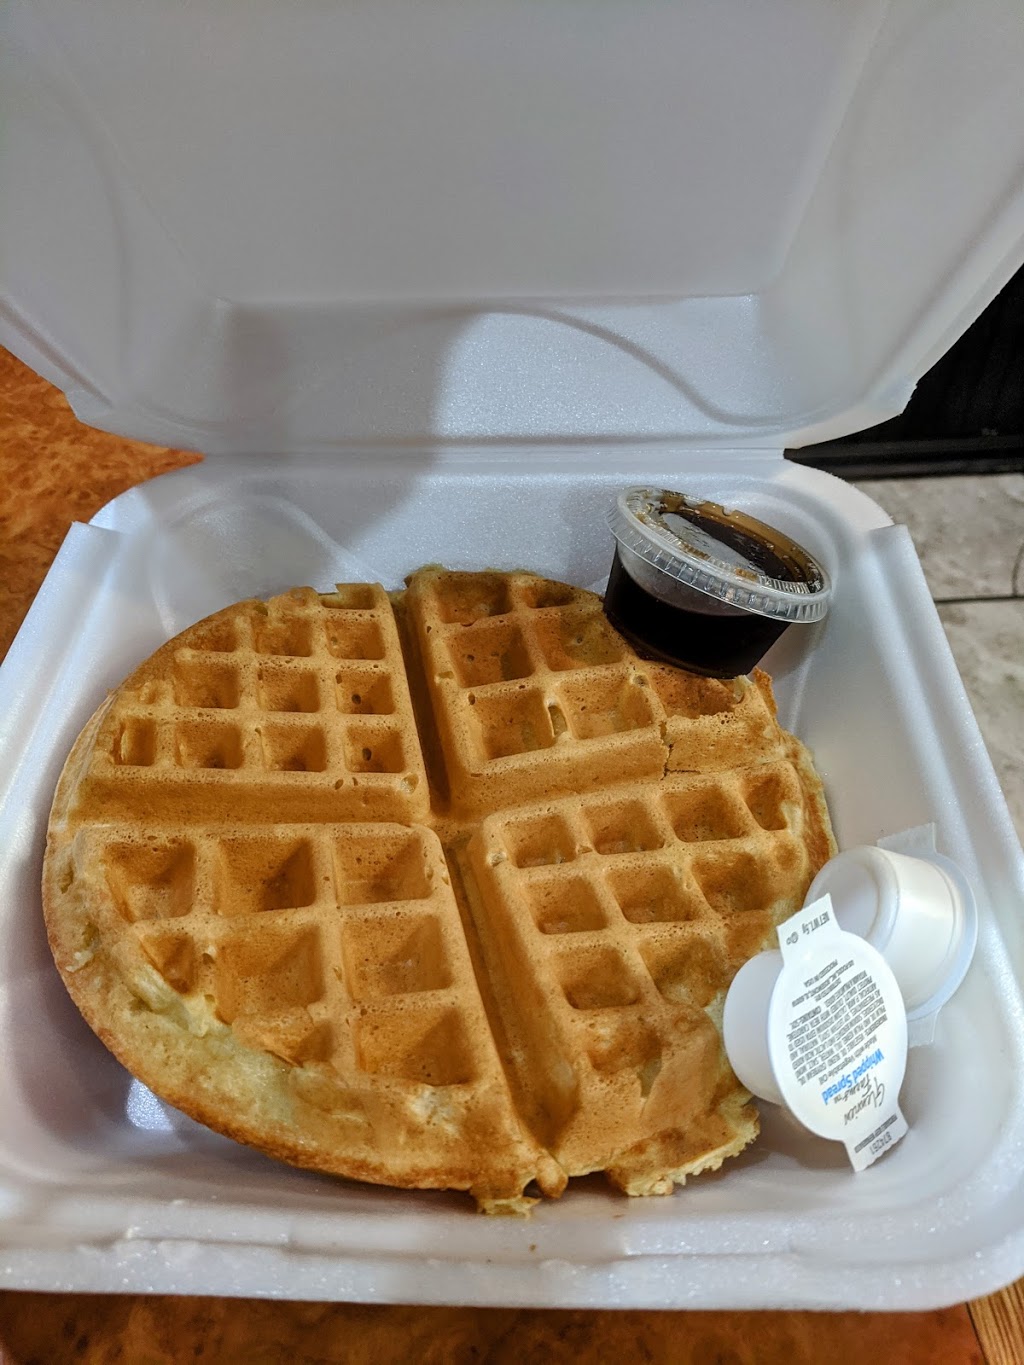 Early Waffle | restaurant | 11915 N Tryon St Suite G, Charlotte, NC 28262, USA | 7049007010 OR +1 704-900-7010